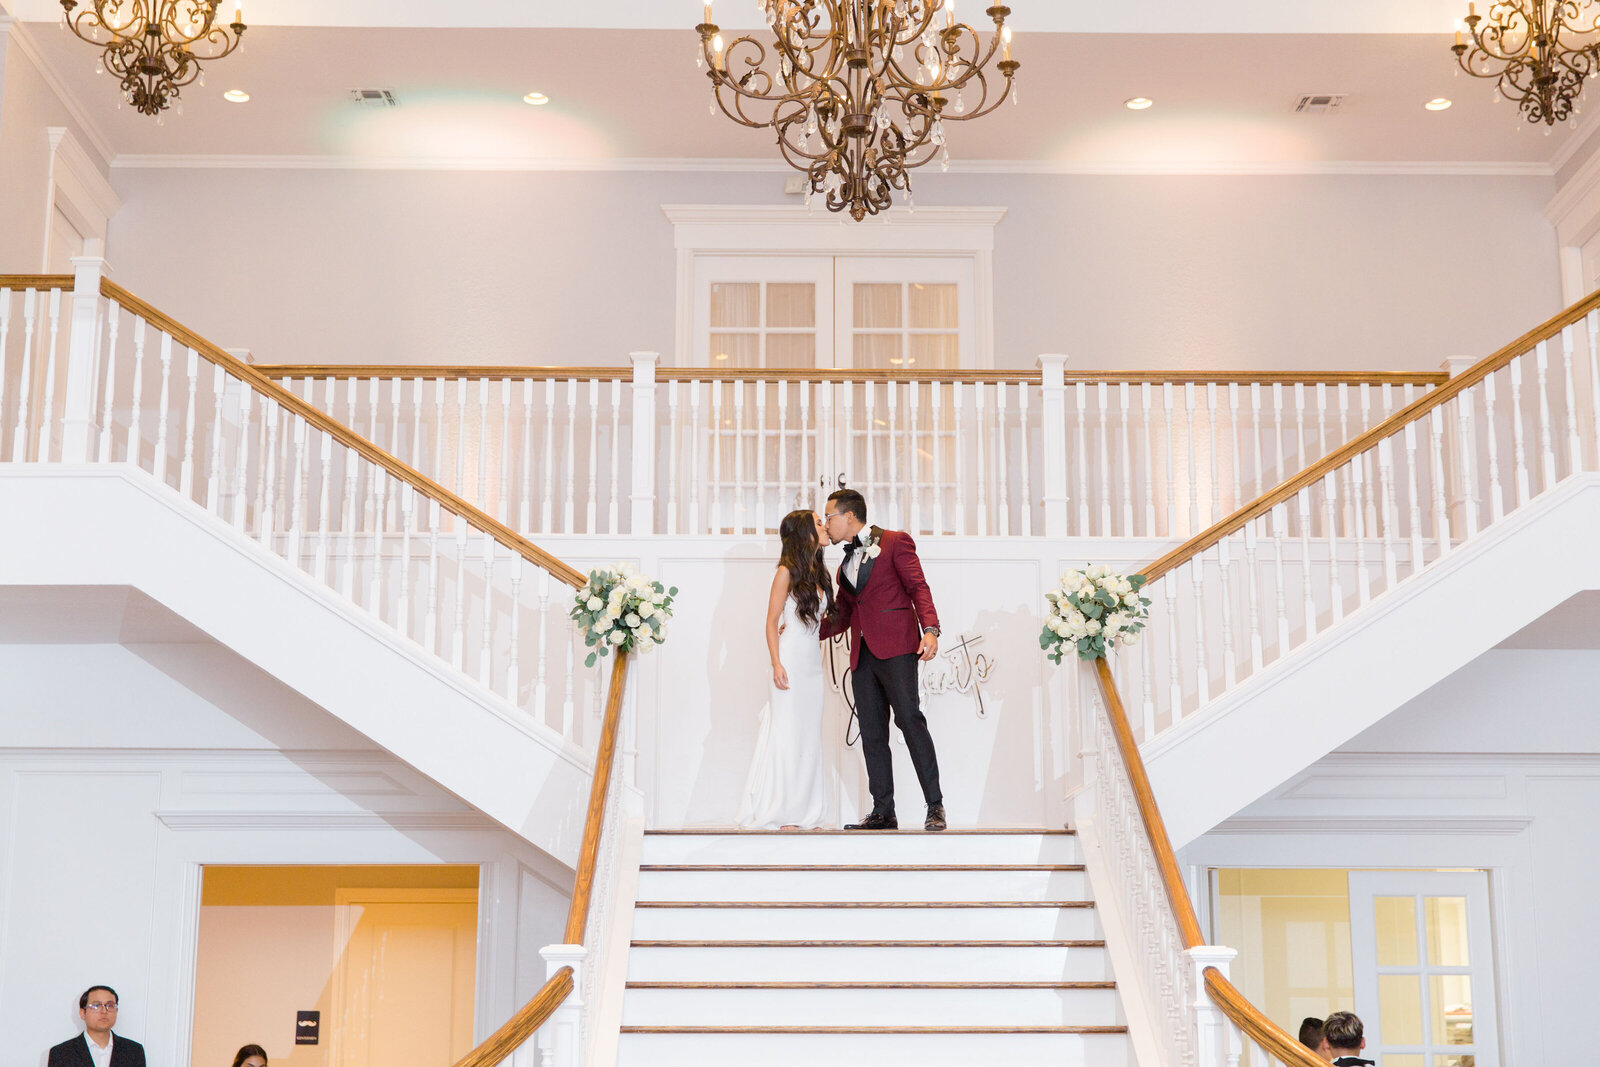 A couple kiss on the staircase landing in the ballroom.